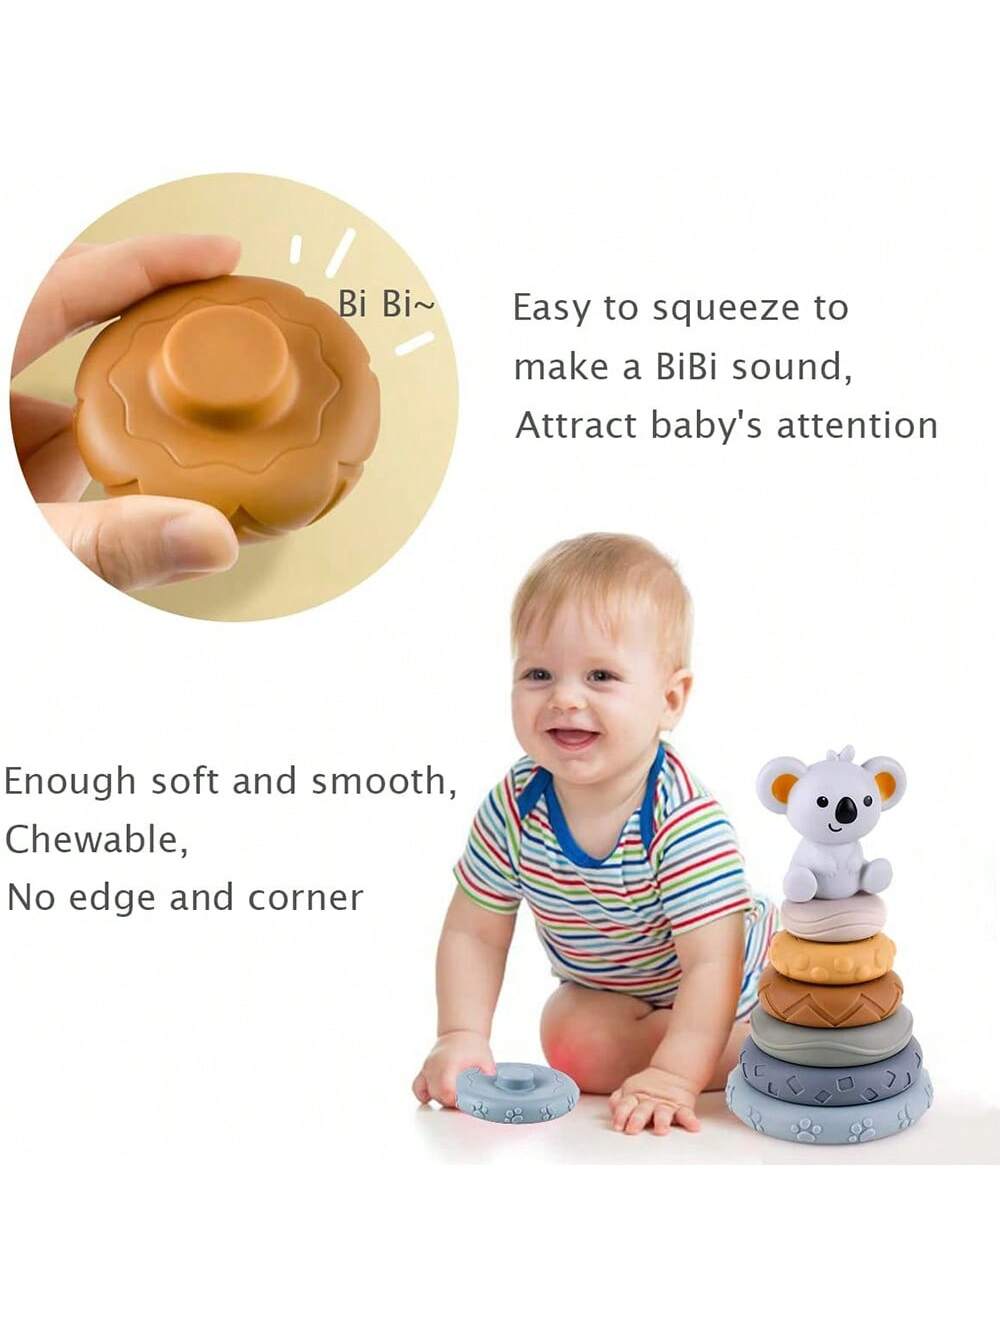 7pcs/Set Stacking Toys For Newborn And Infant (6, 12, 18 Months), Including 6 Colored Textured Silicone Stacking Rings, Sensory Development Educational Toy Gift